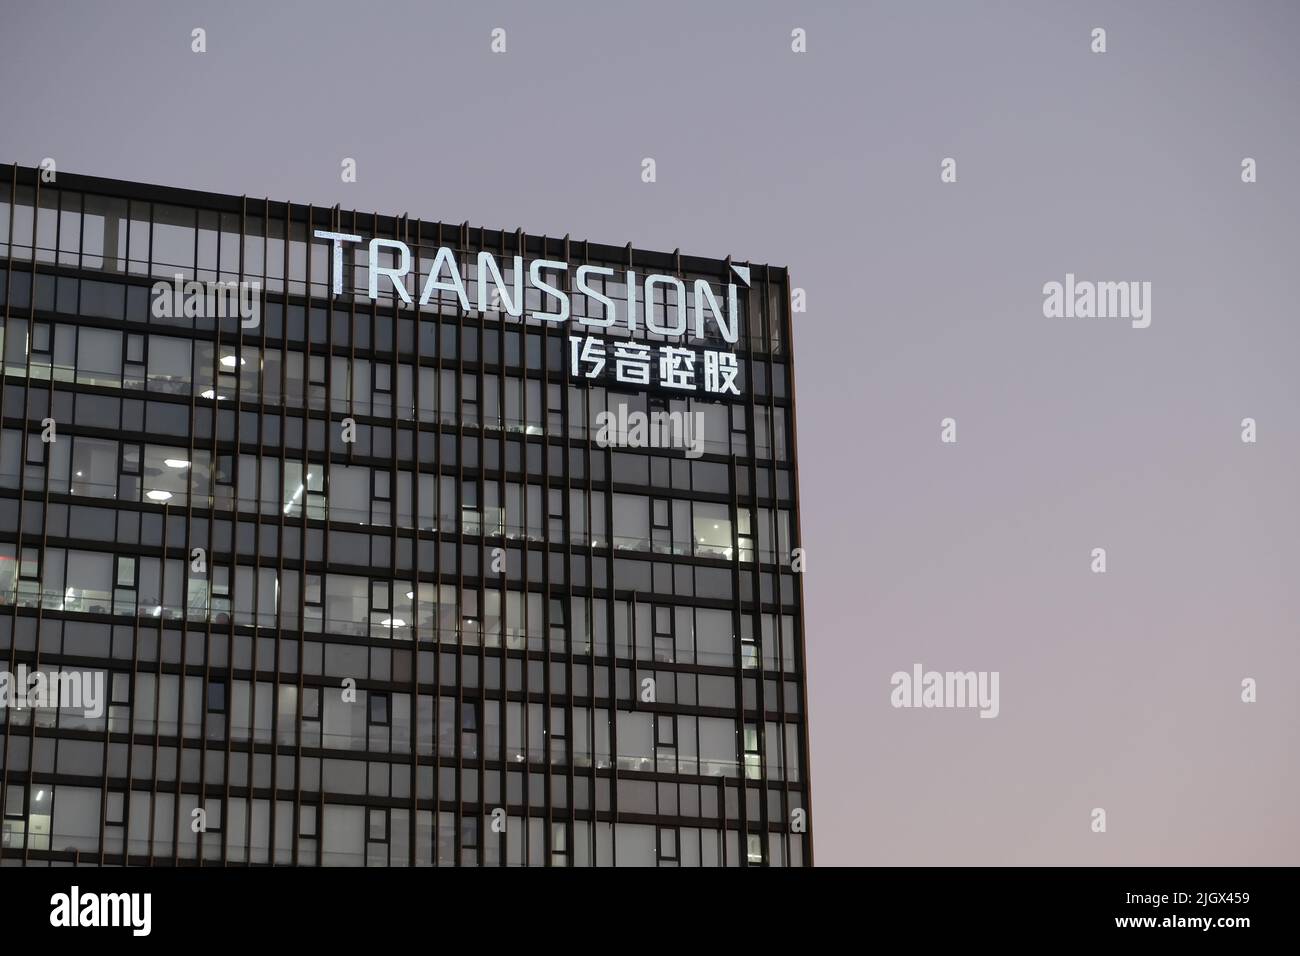 Foto Gedung Perusahaan Transsion Holdings (alamy.com)